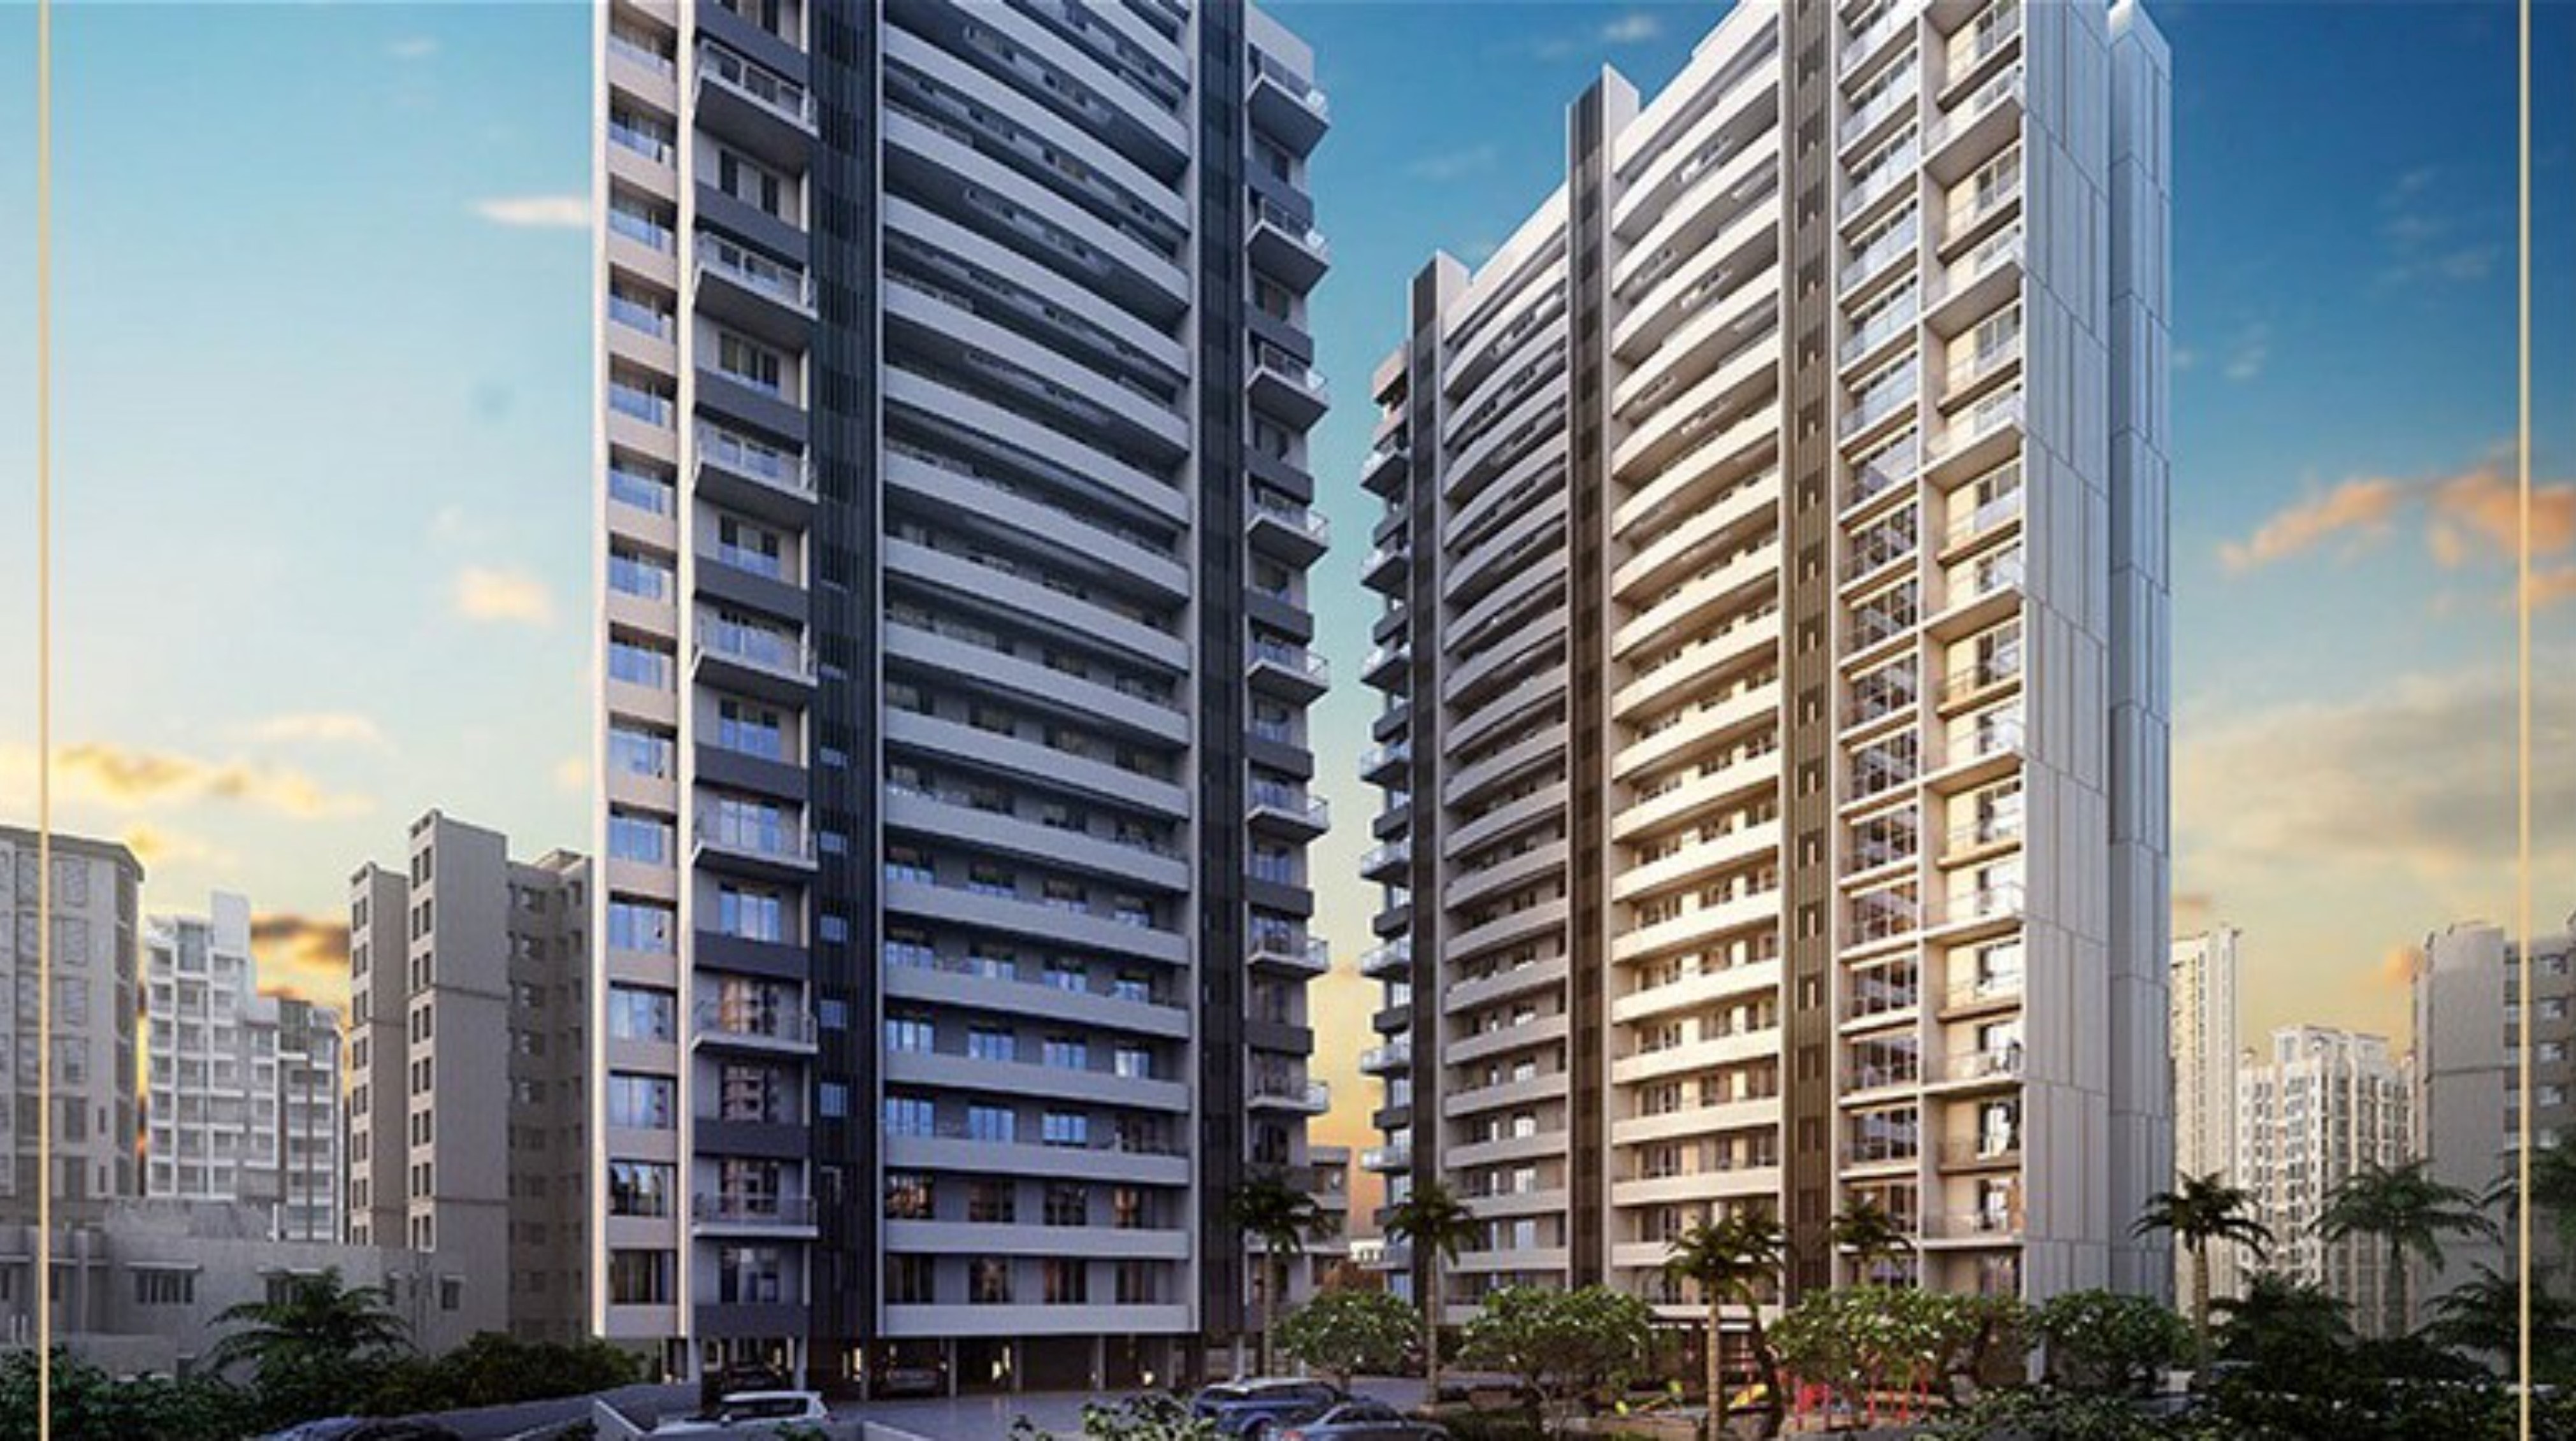 Tycoons Solitaire at Kalyan West, Mumbai by Tycoons Realities